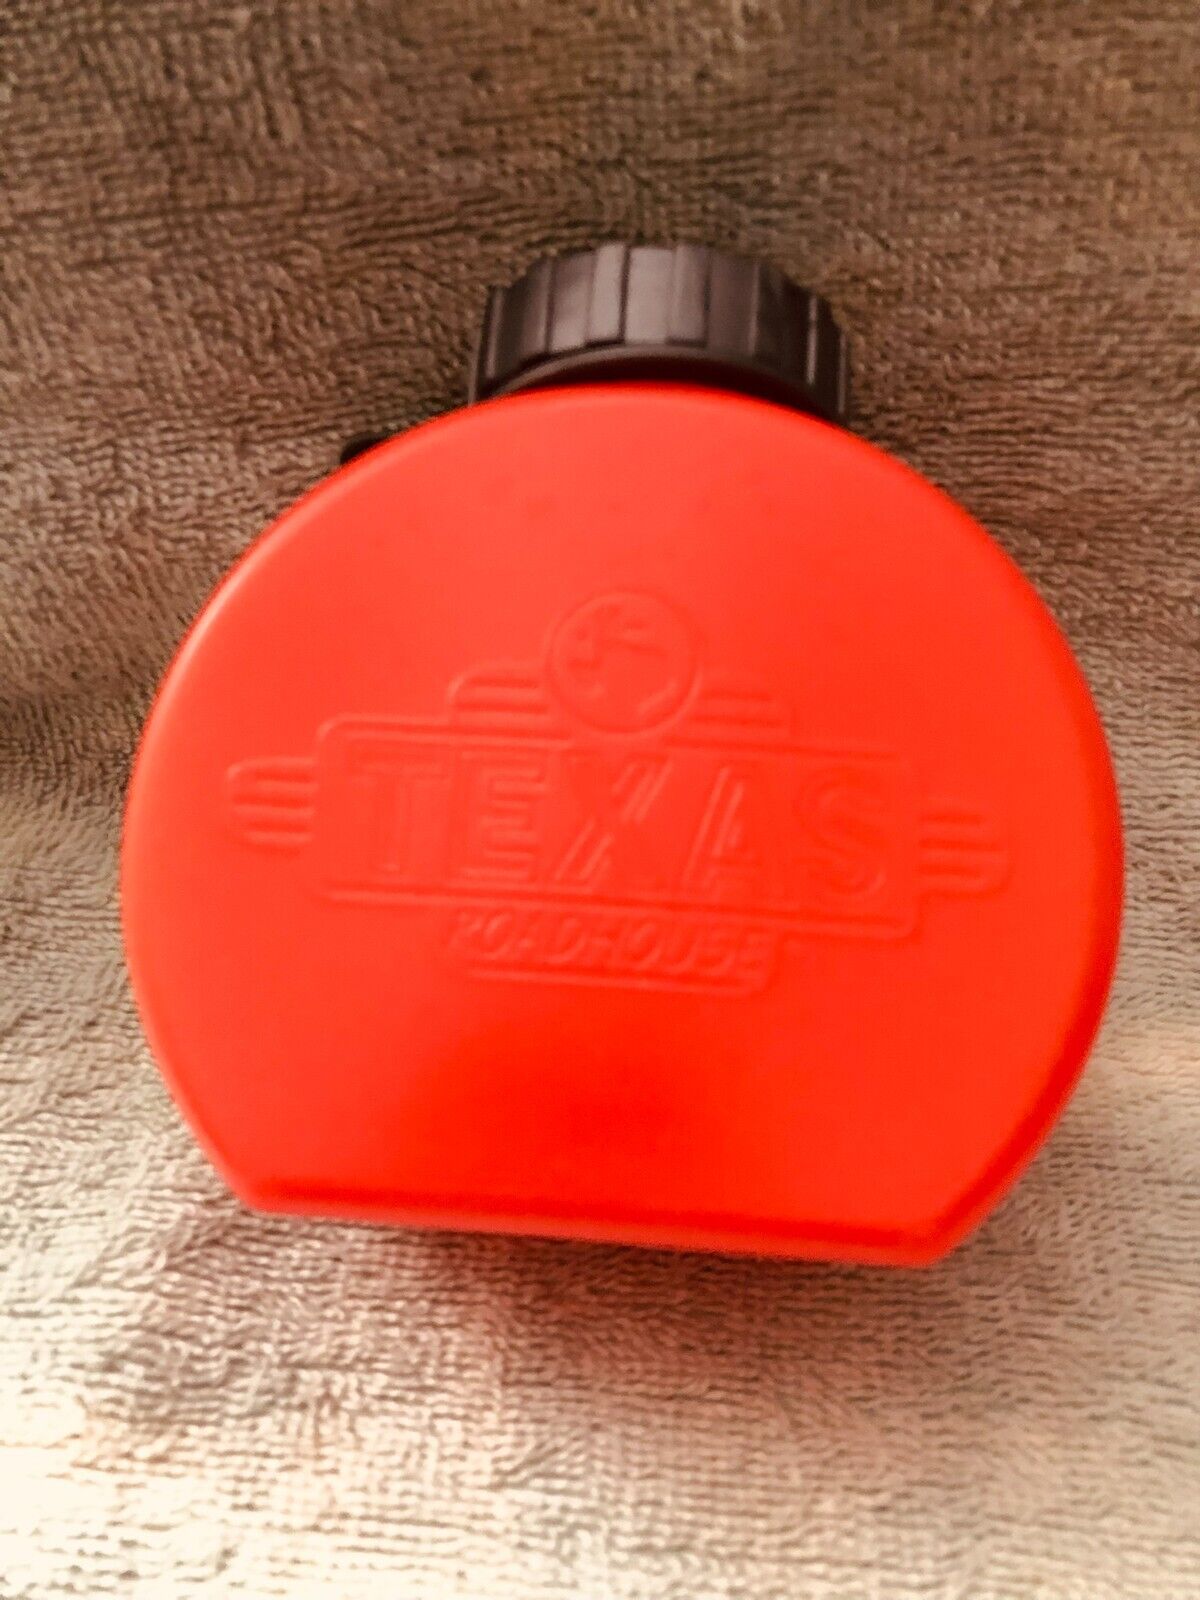 TEXAS ROADHOUSE HOT SAUCE SQUEEZER CUP Insulated Tumbler Proof Beverage Cup